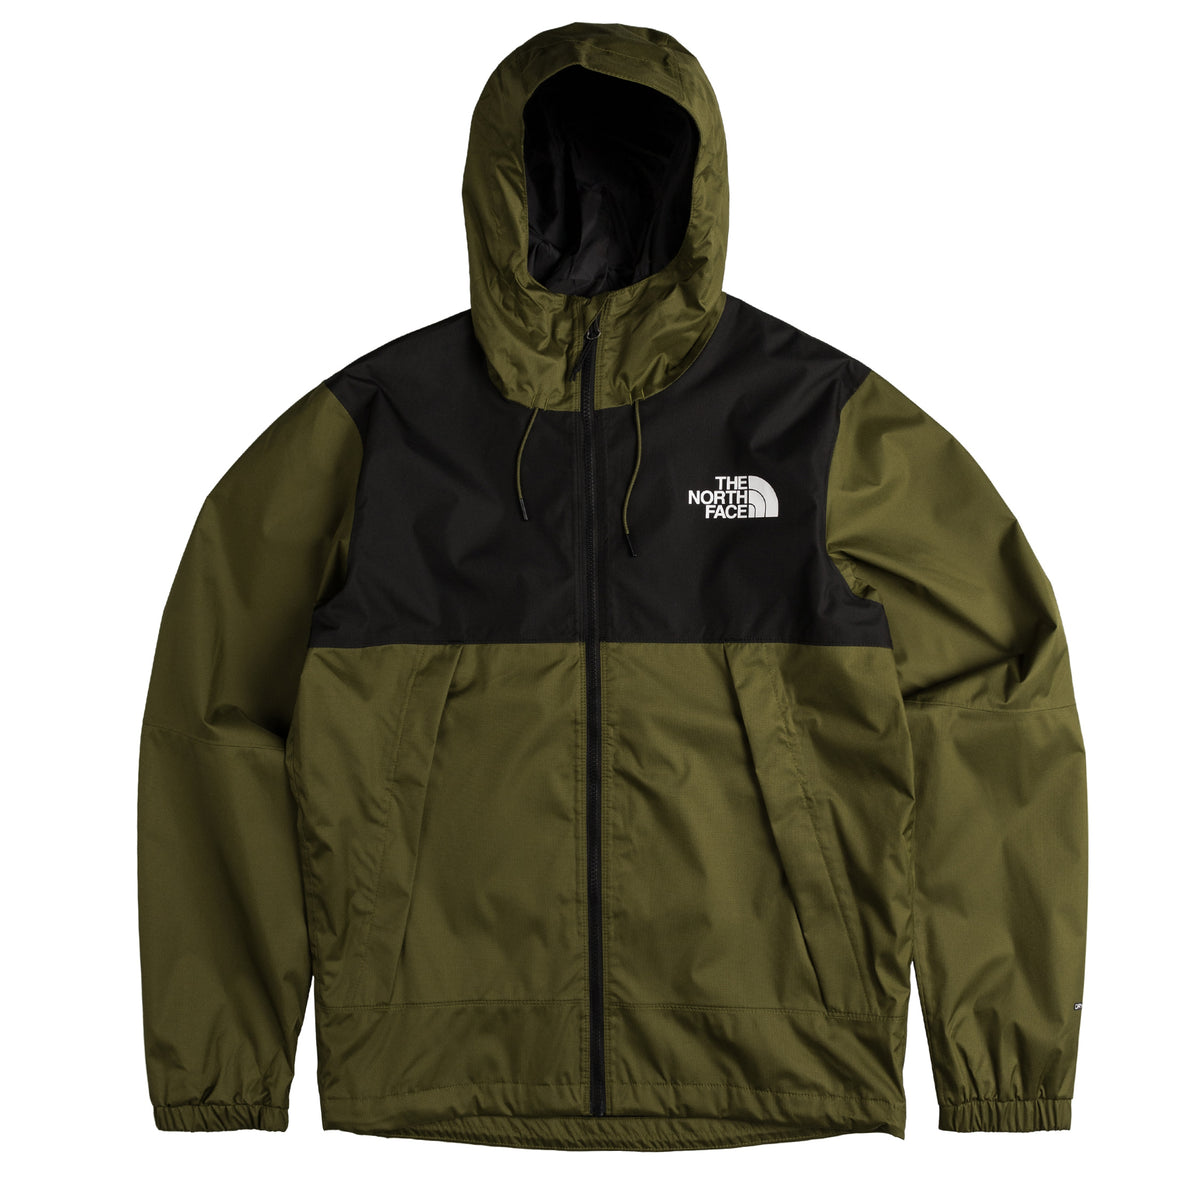 The North Face Mountain Q Jacket » Buy online now!